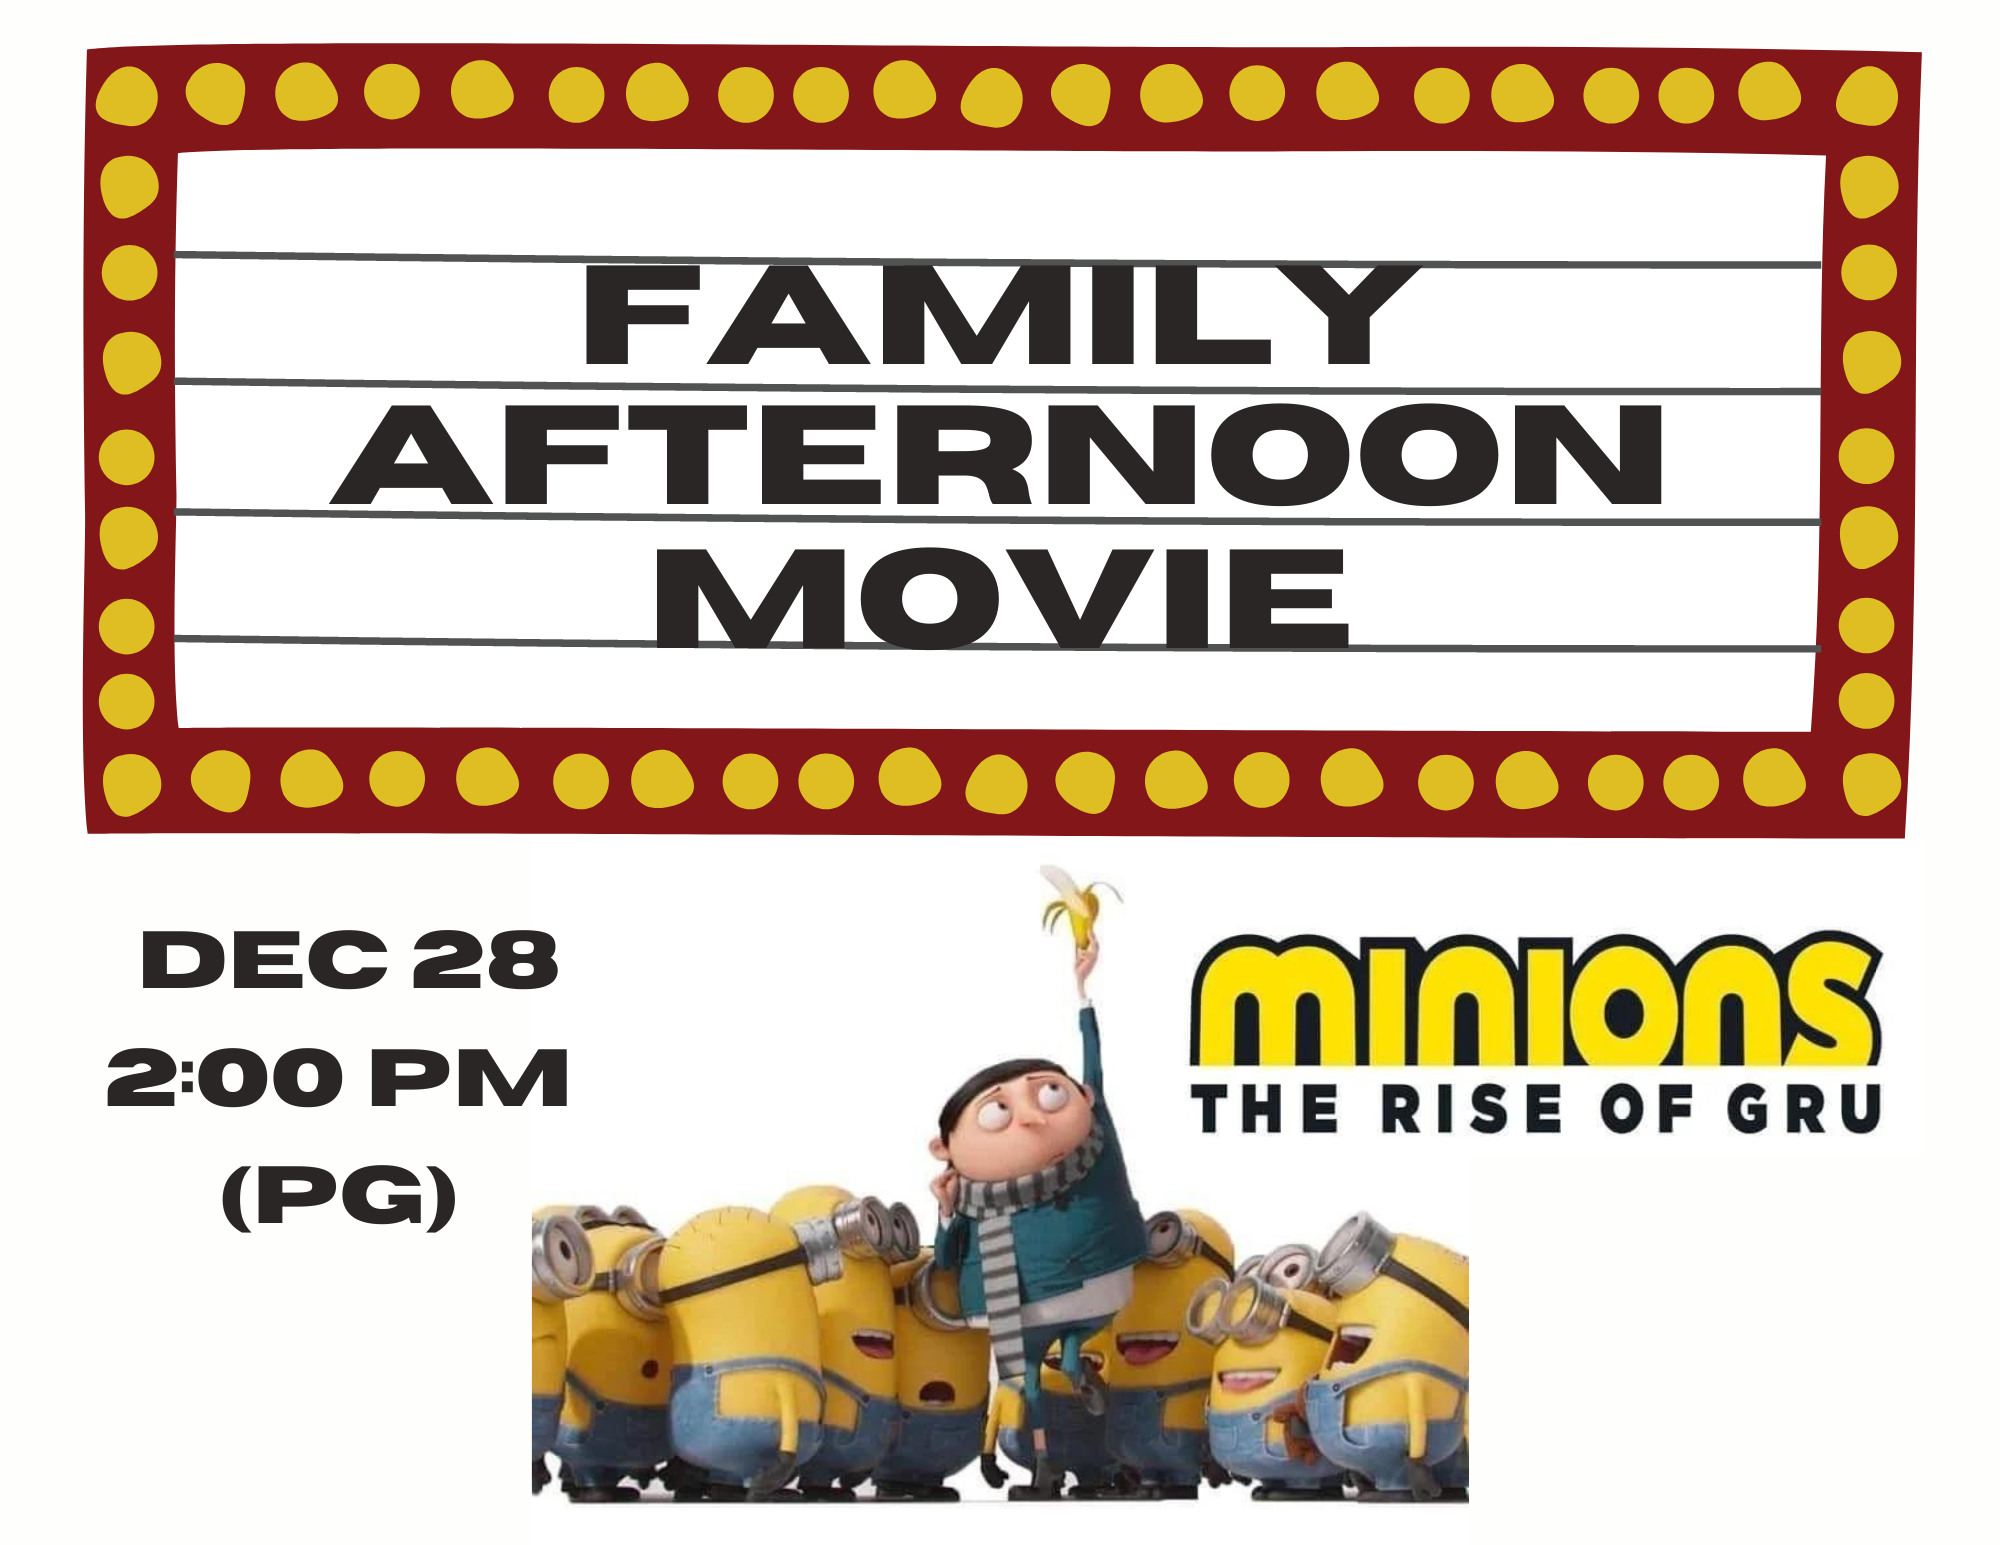 Family Afternoon Movie